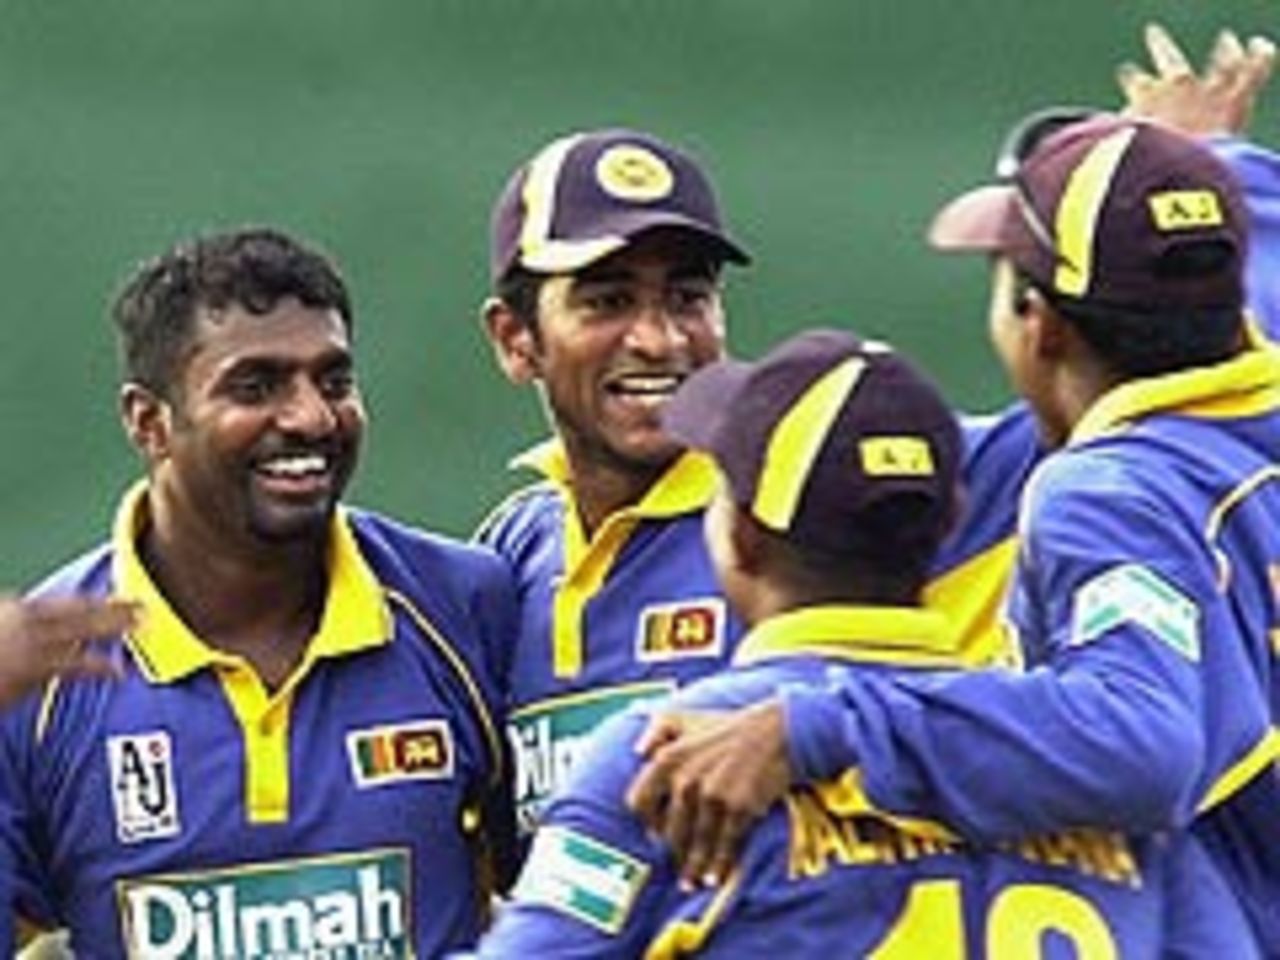 Muttiah Muralitharan celebrates on his way to a match-winning 5 for 23 against Pakistan (May 18 2003)